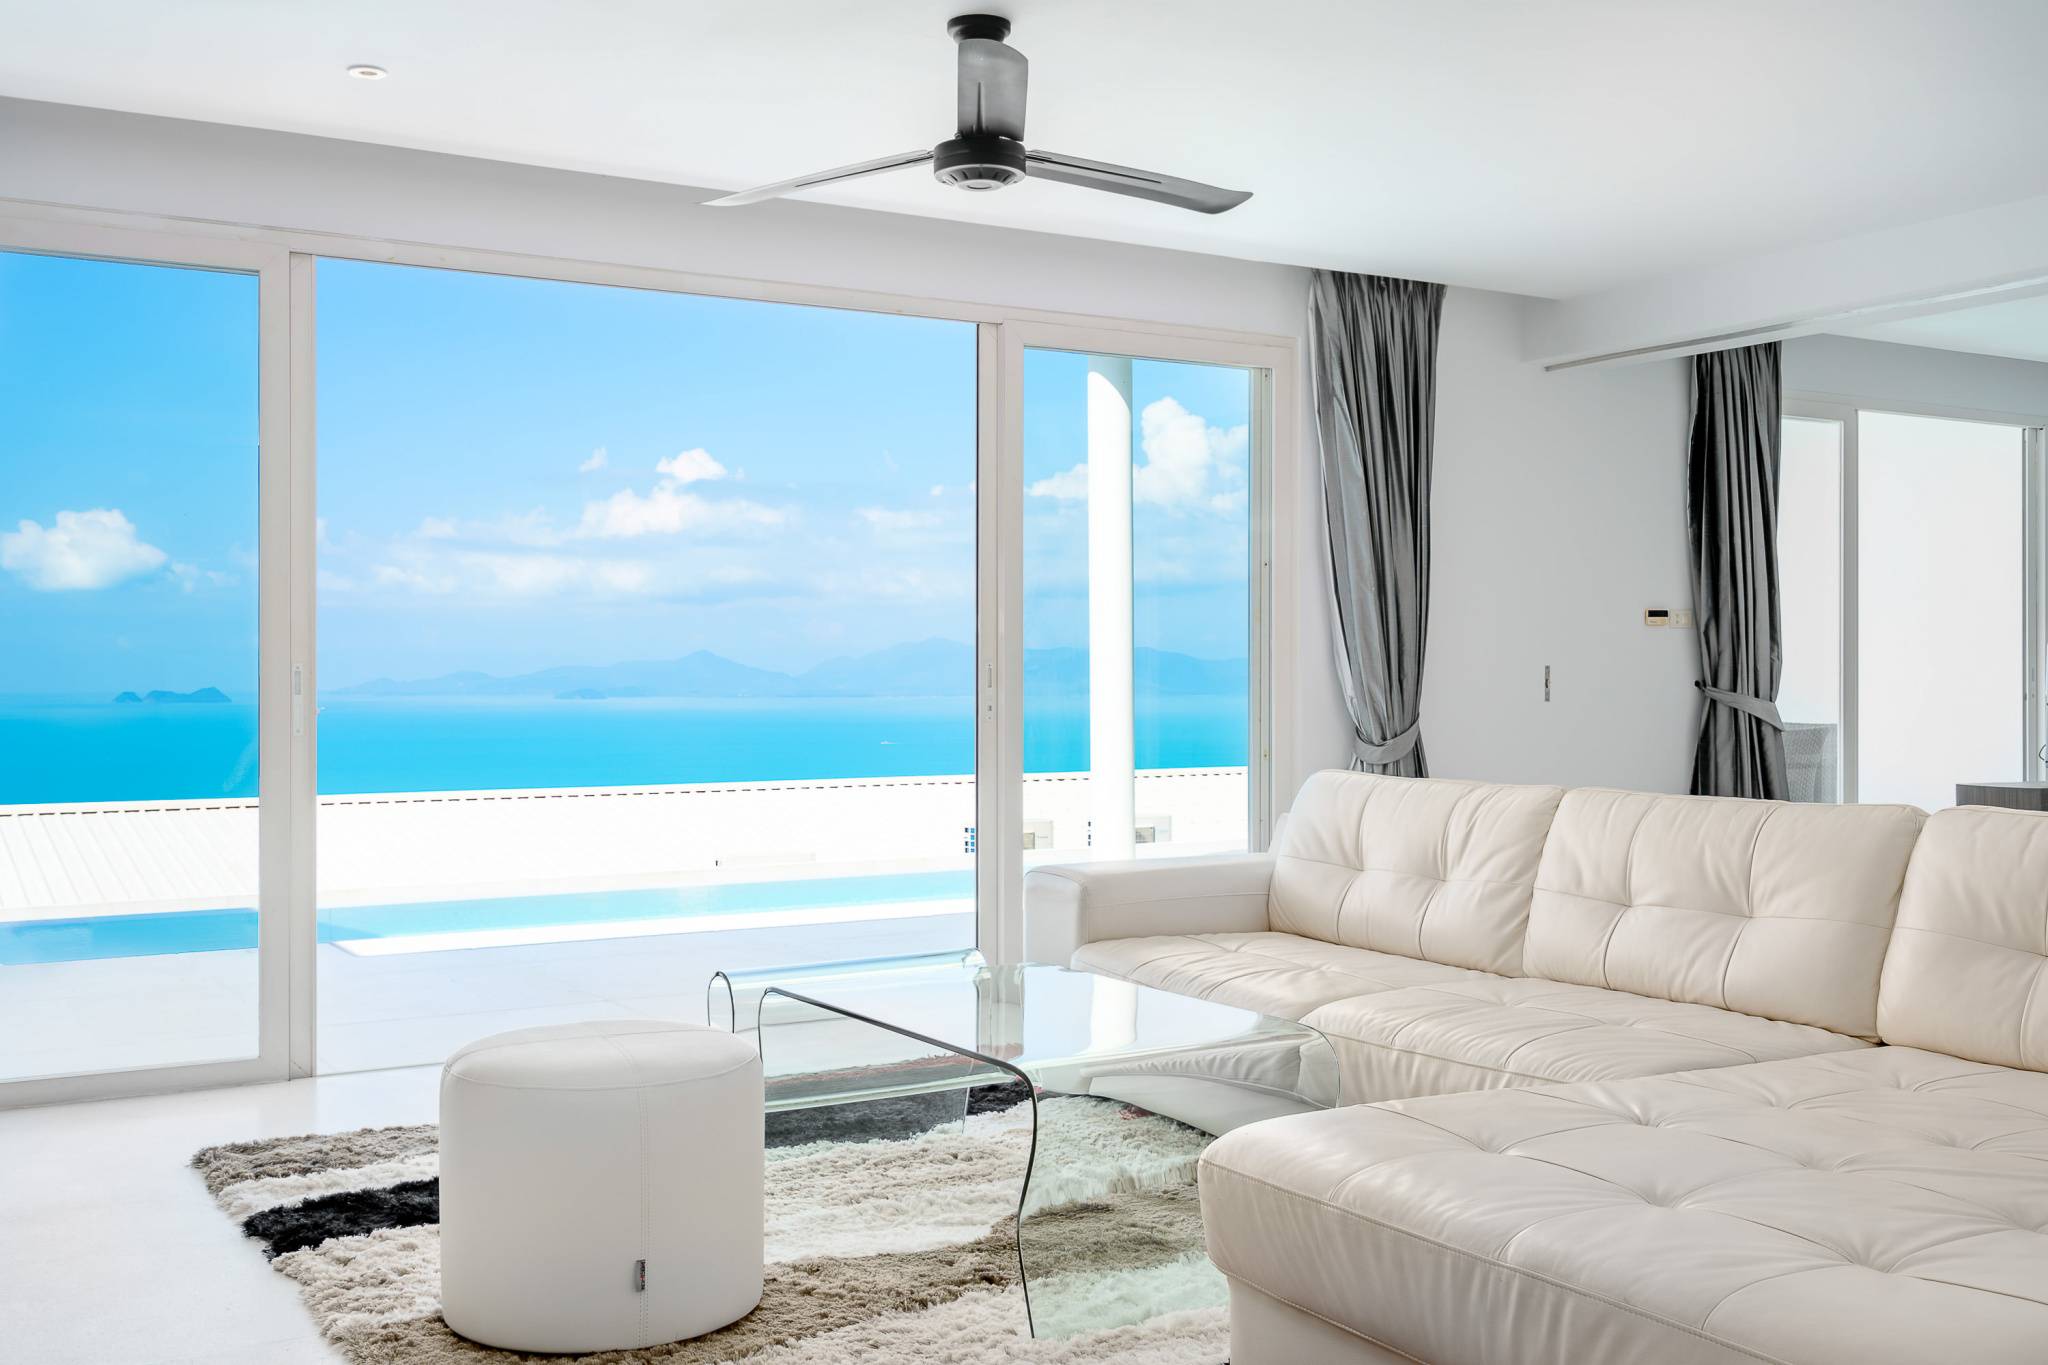 Luxury 1 Bedroom Seaview Apartment with Private Pool in 5* Resort for sale: Luxury 1 Bedroom Seaview Apartment with Private Pool in 5* Resort for sale